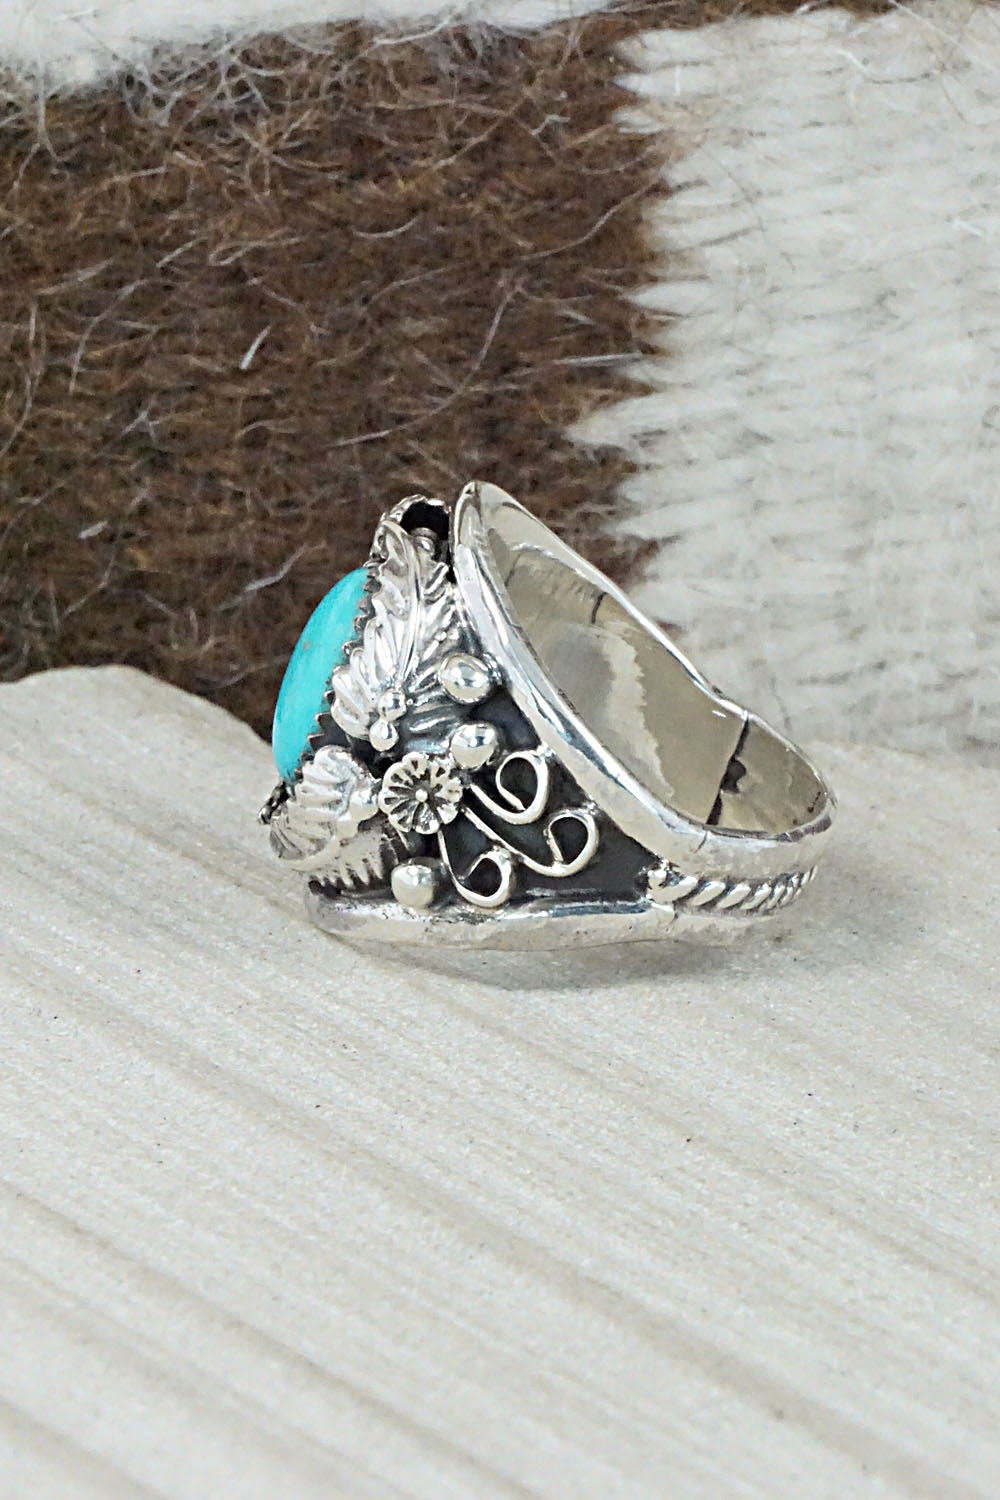 Turquoise & Sterling Silver Ring - Gilbert Smith - Size 10